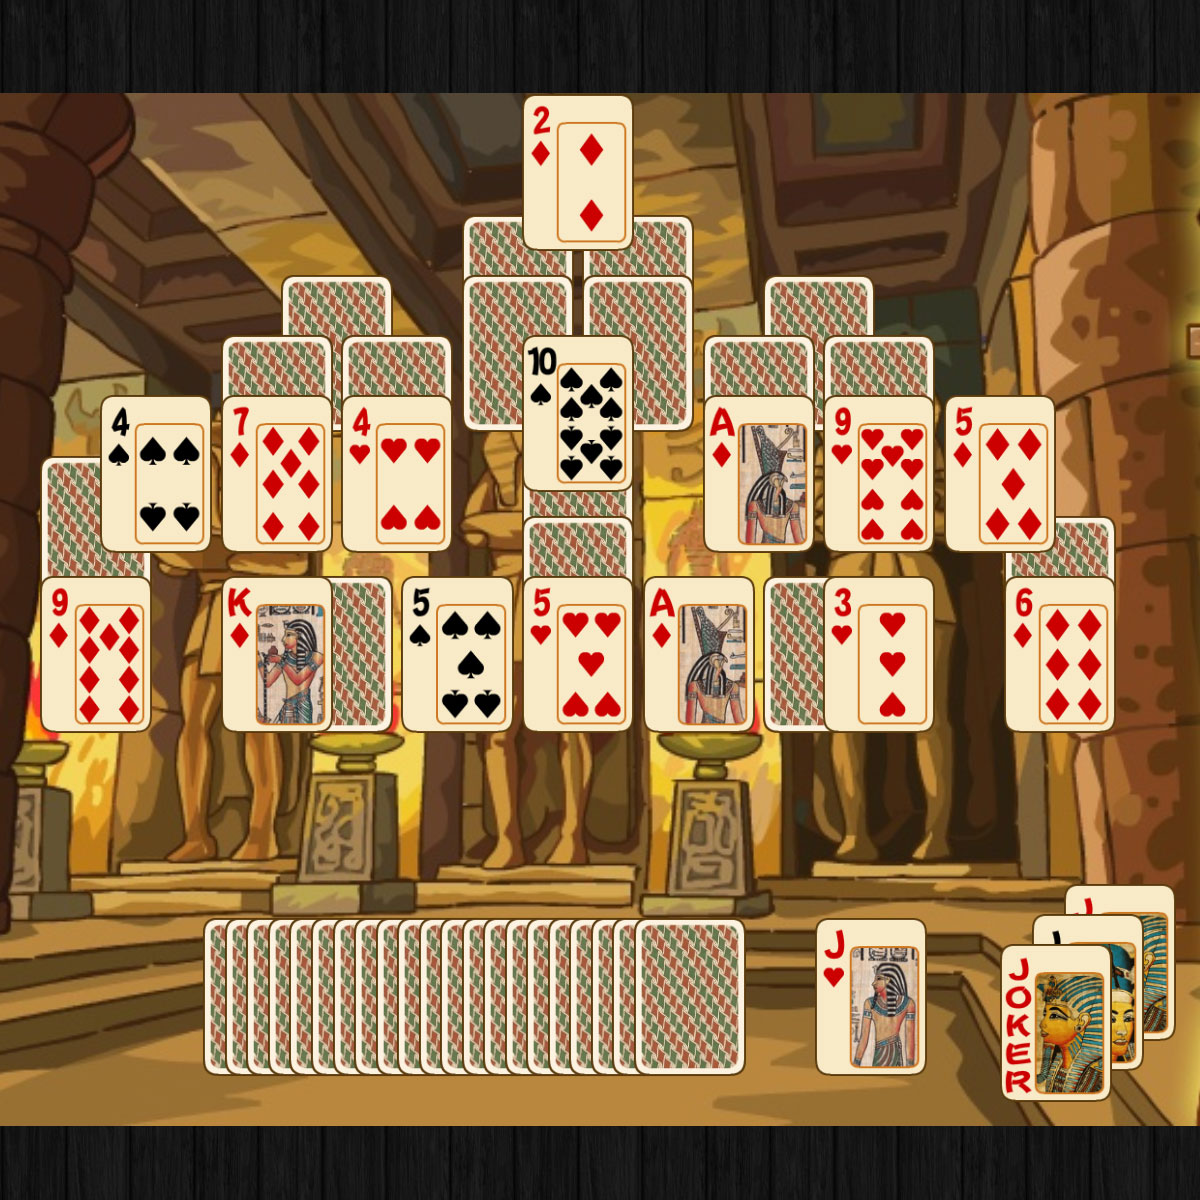 247 pyramid solitaire free online